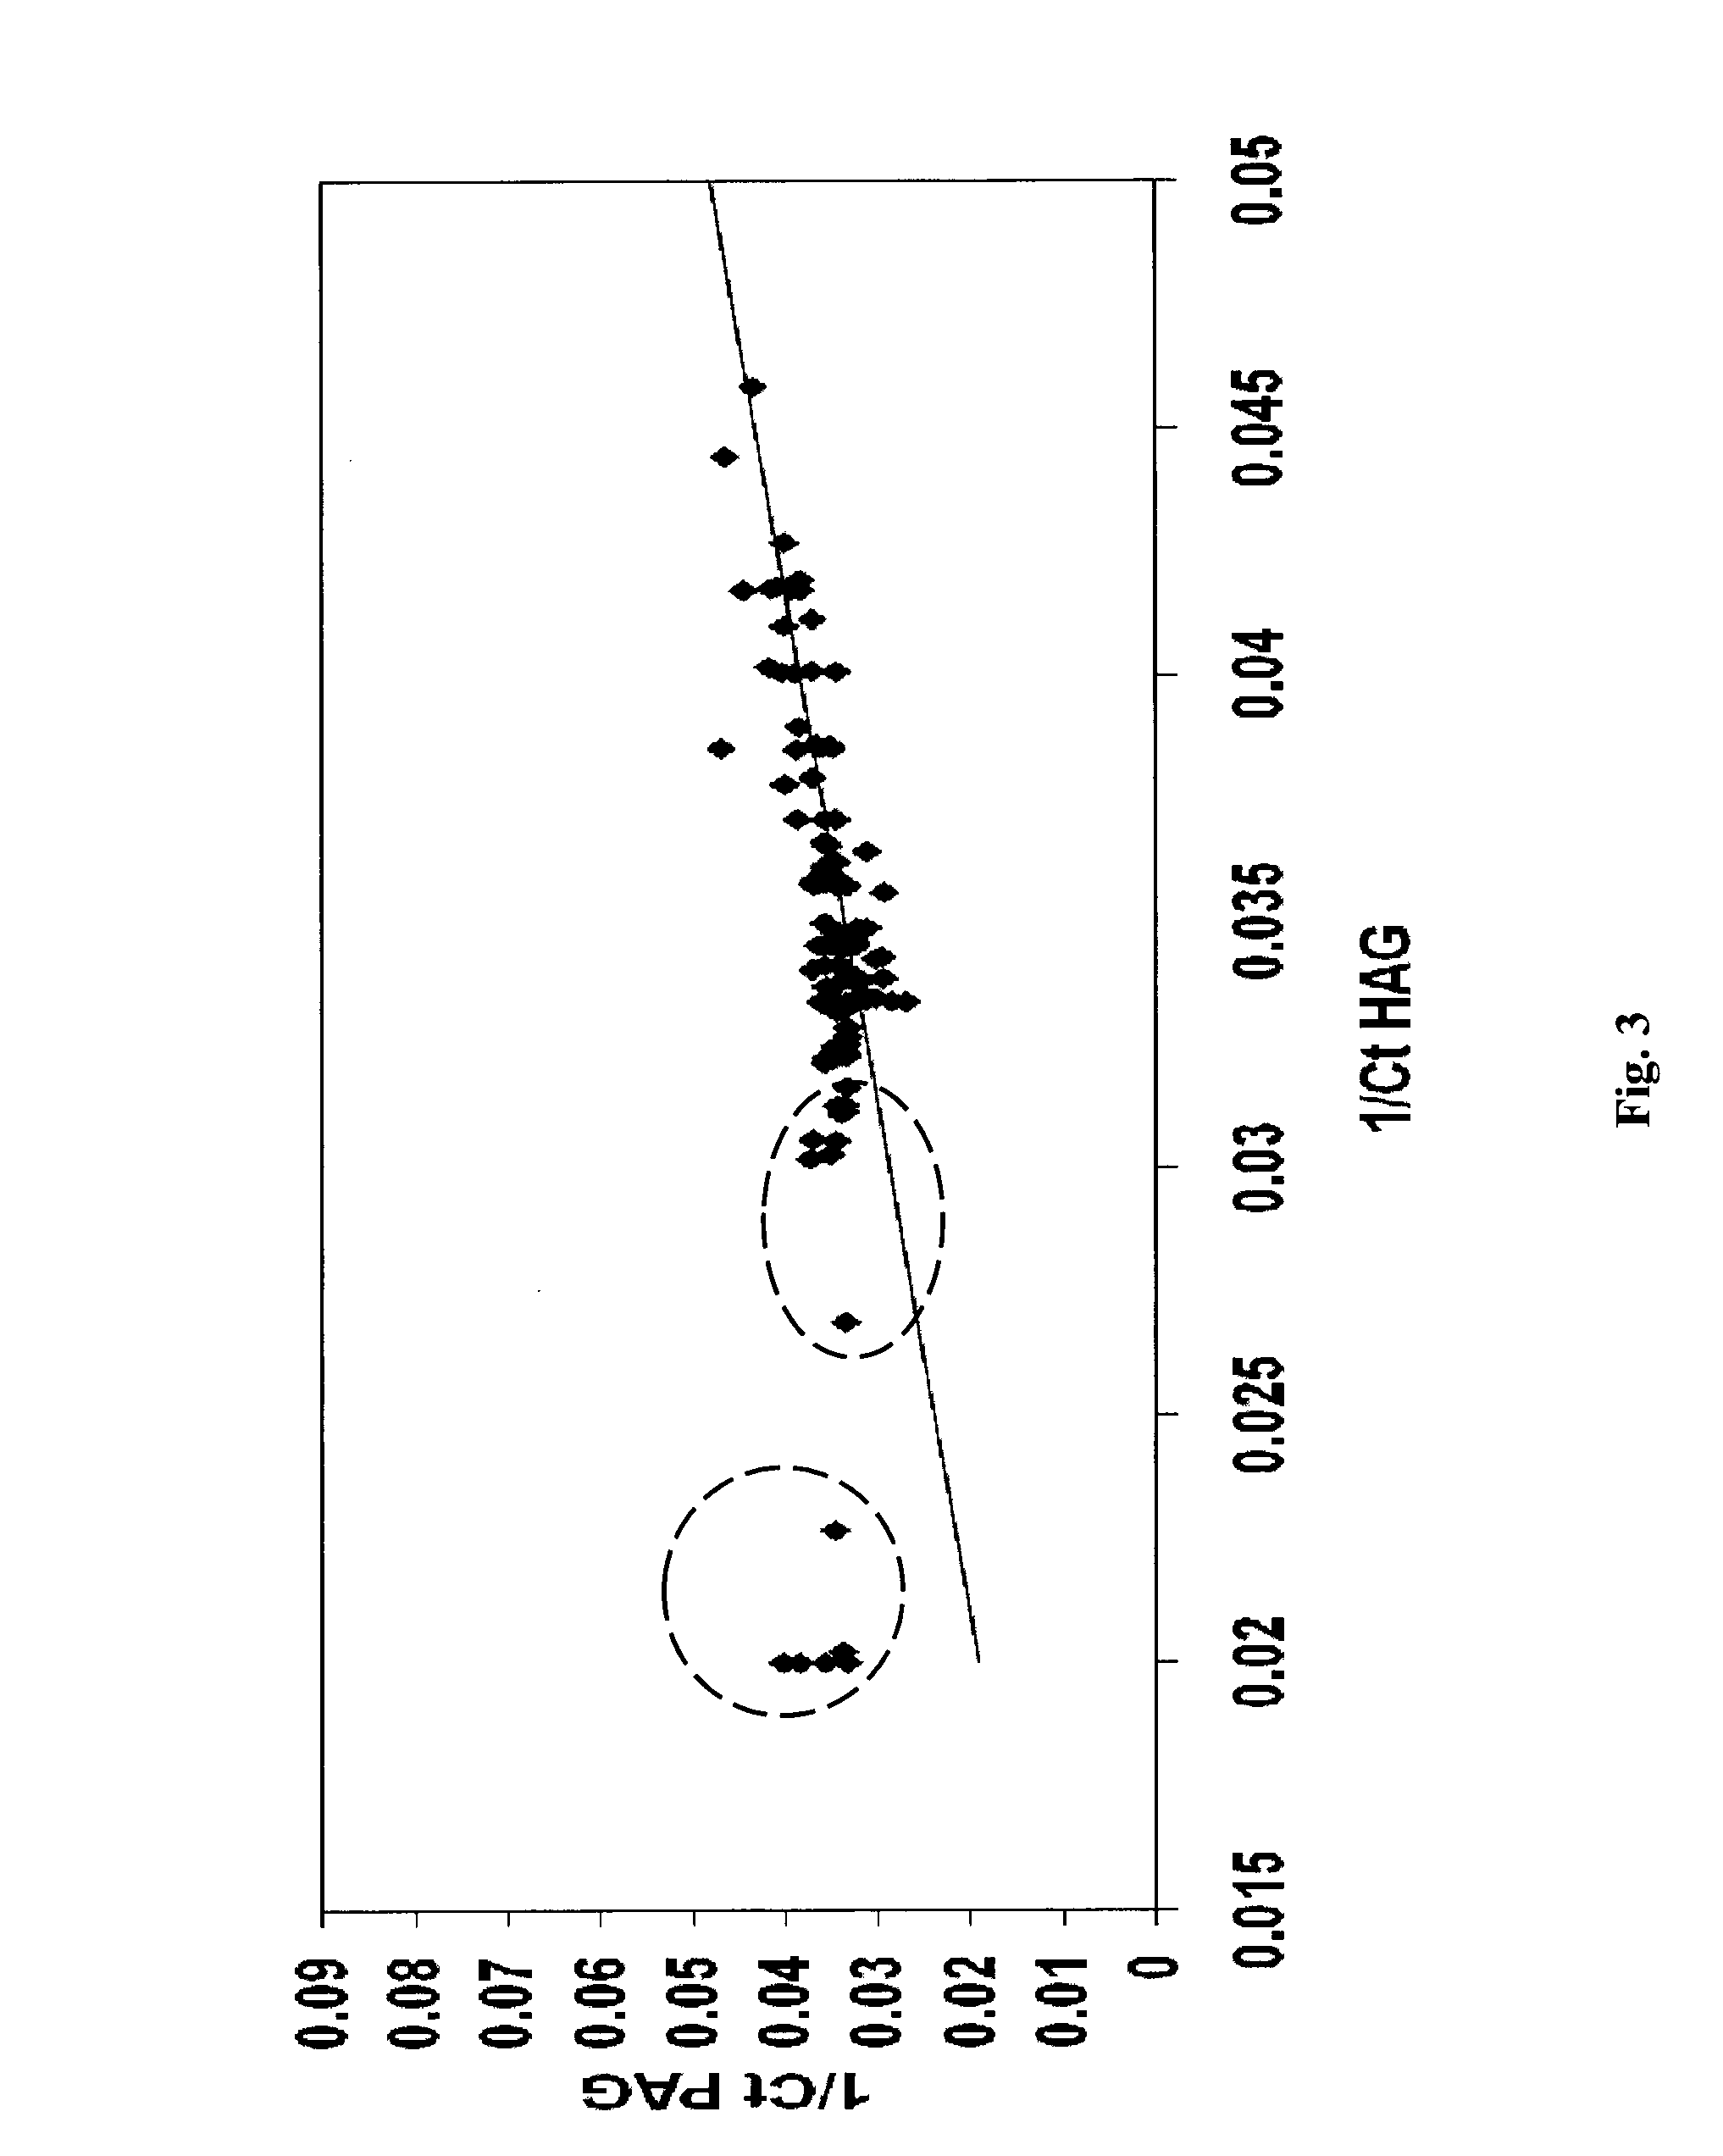 Microrna patterns for the diagnosis, prognosis and treatment of melanoma